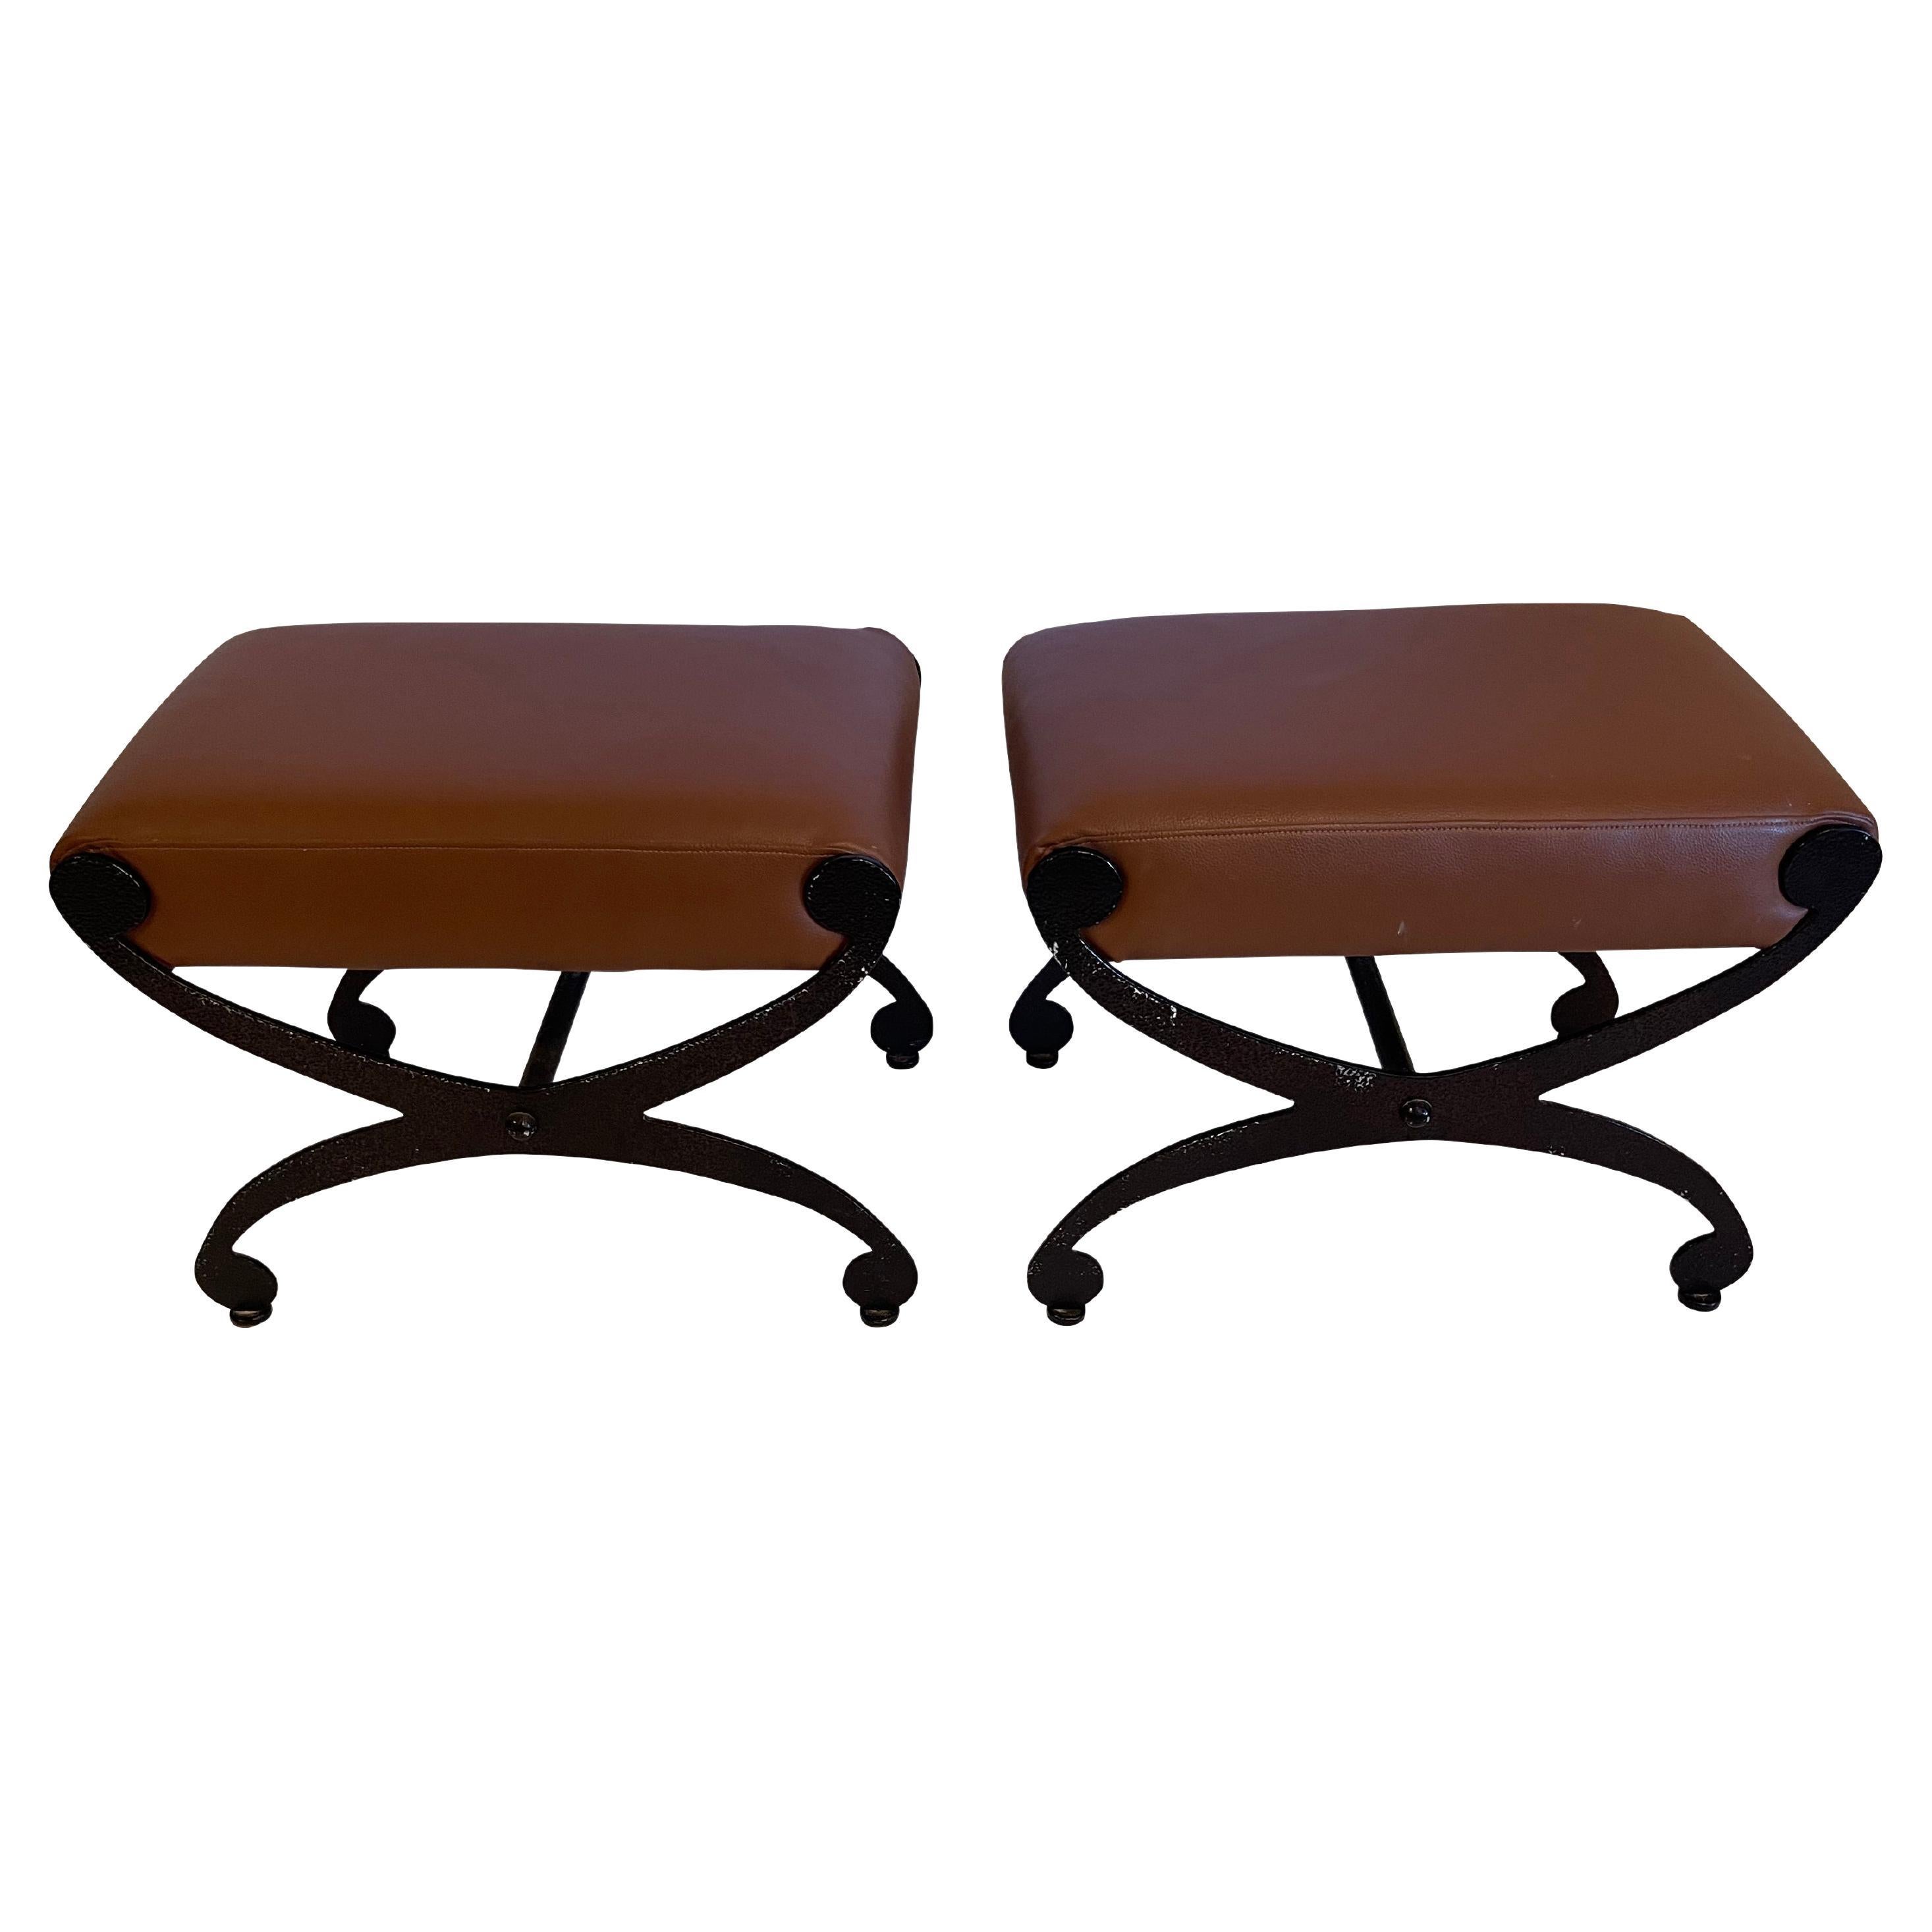 Pair of Stylish Black Iron and Tan Leather Benches